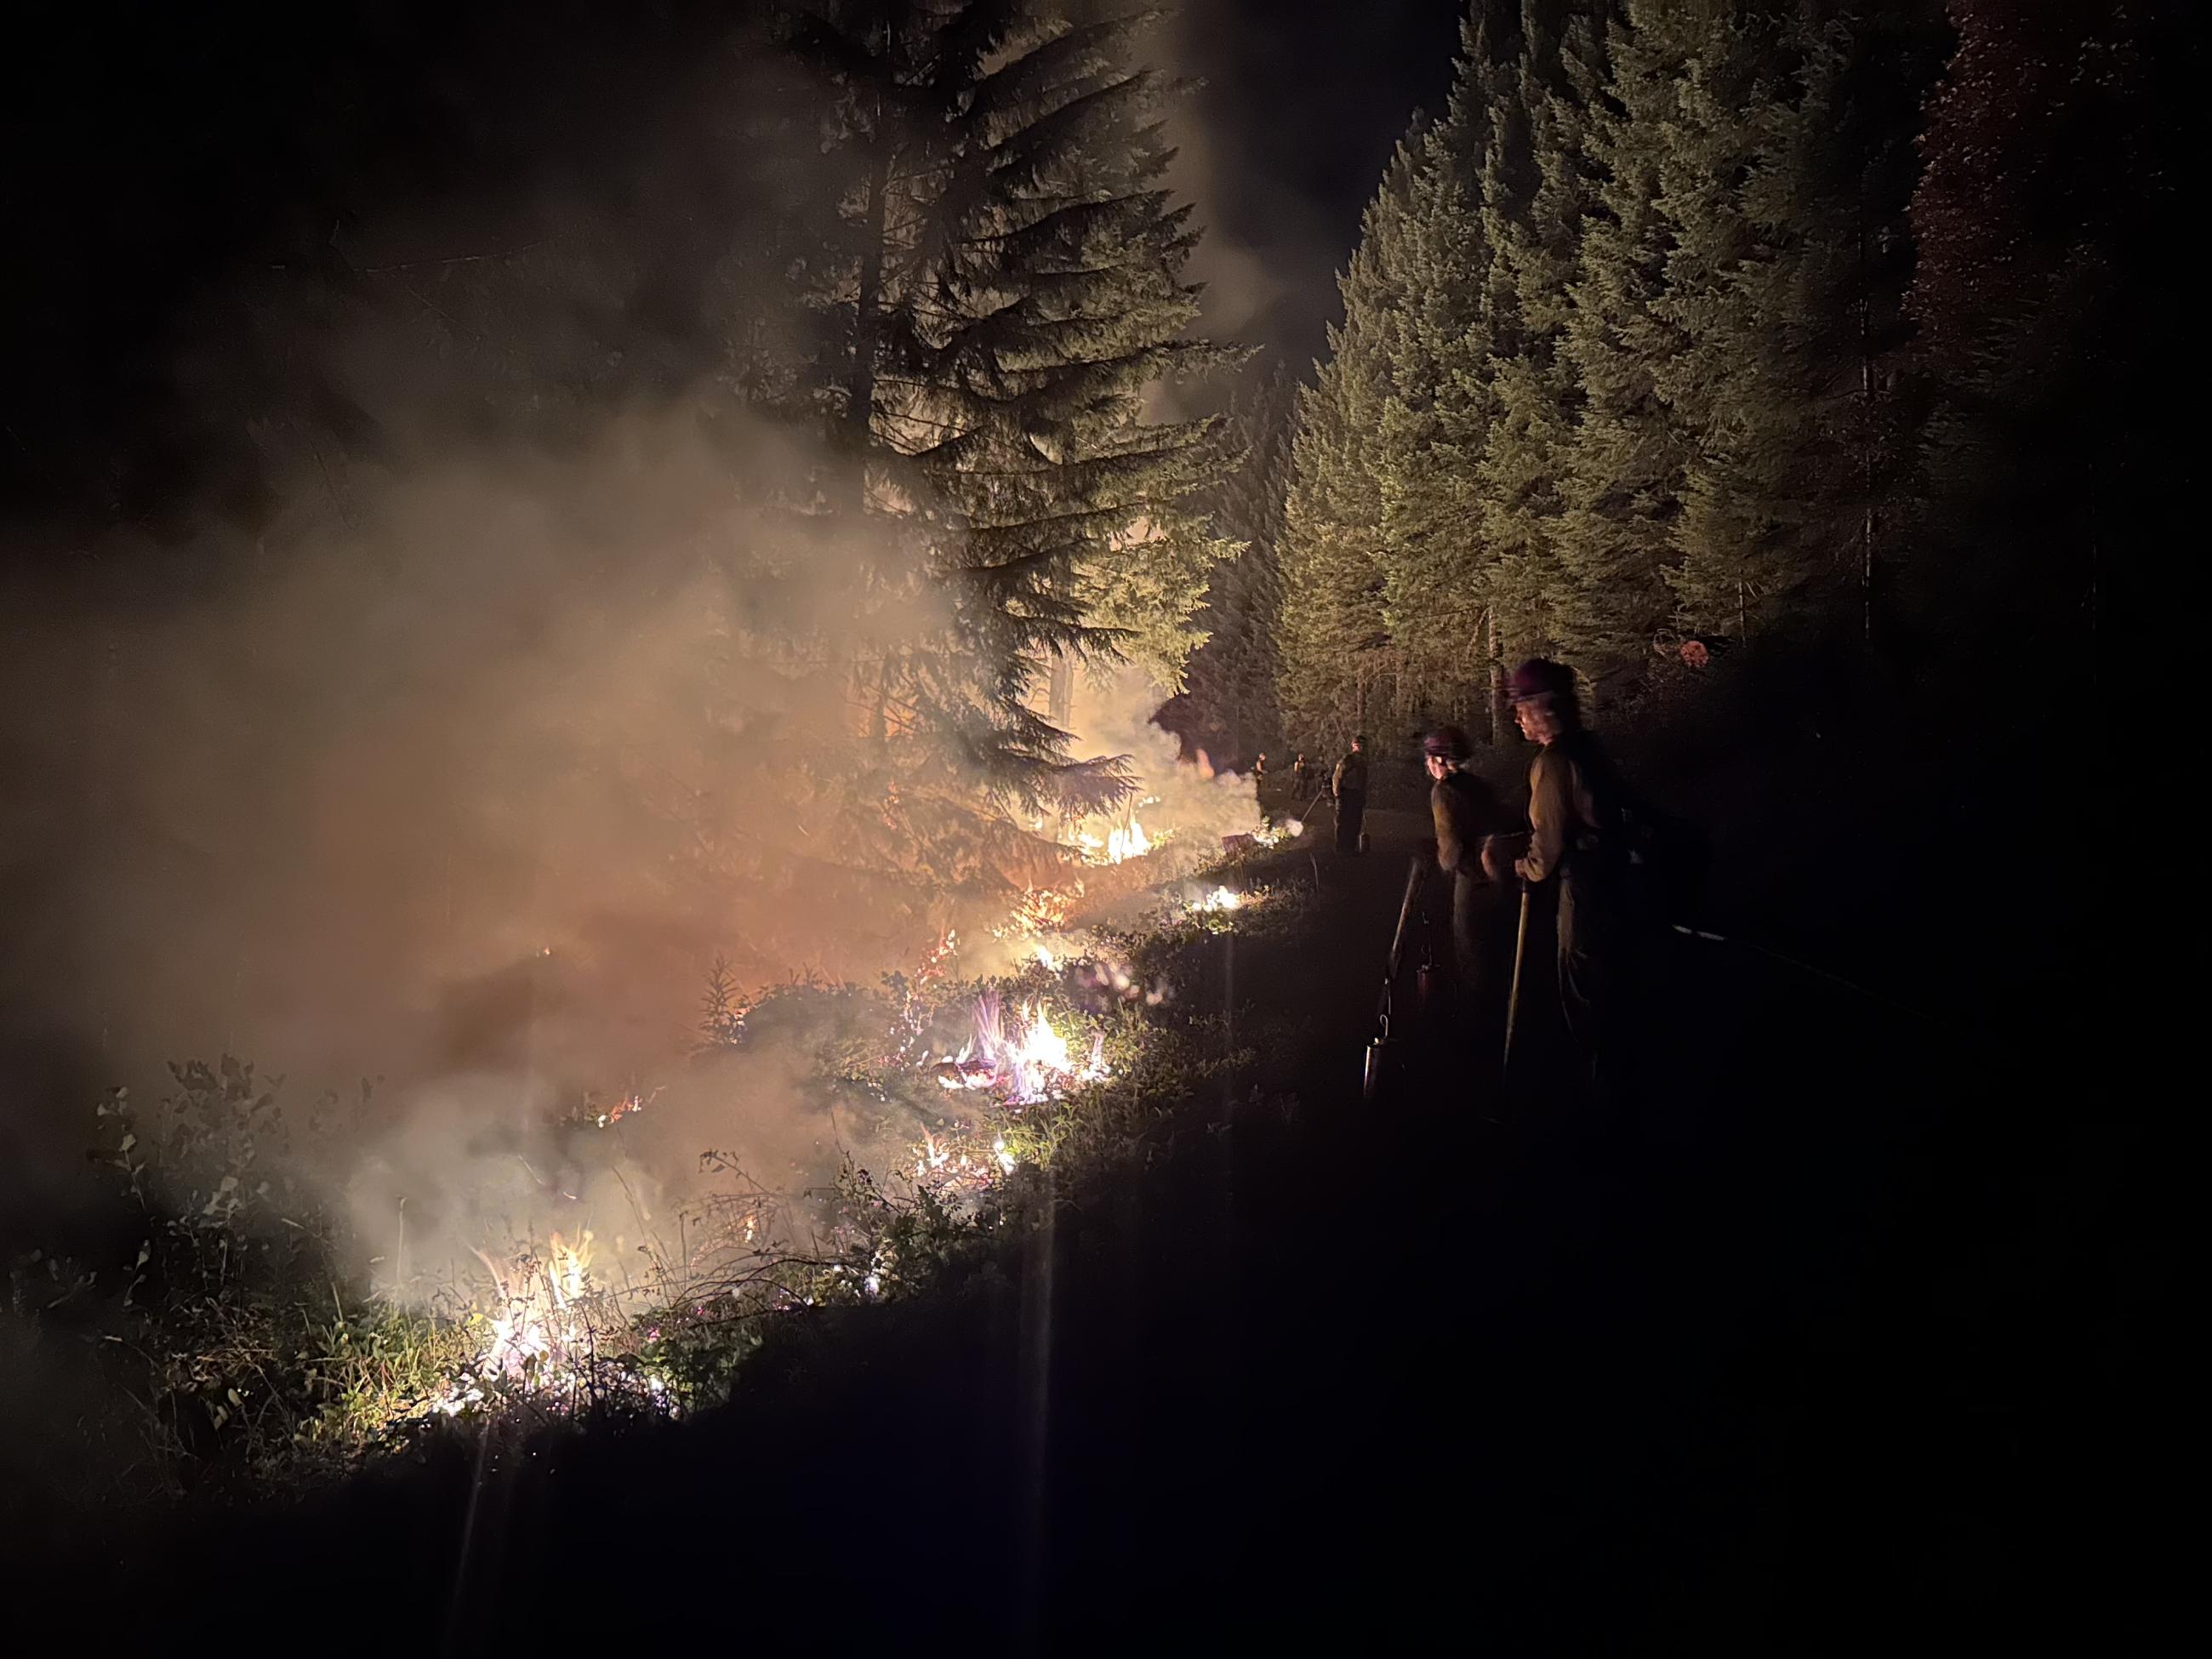 Firefighters conducting a tactical firing operation at night. They are watching for any spot fires across the fire line.